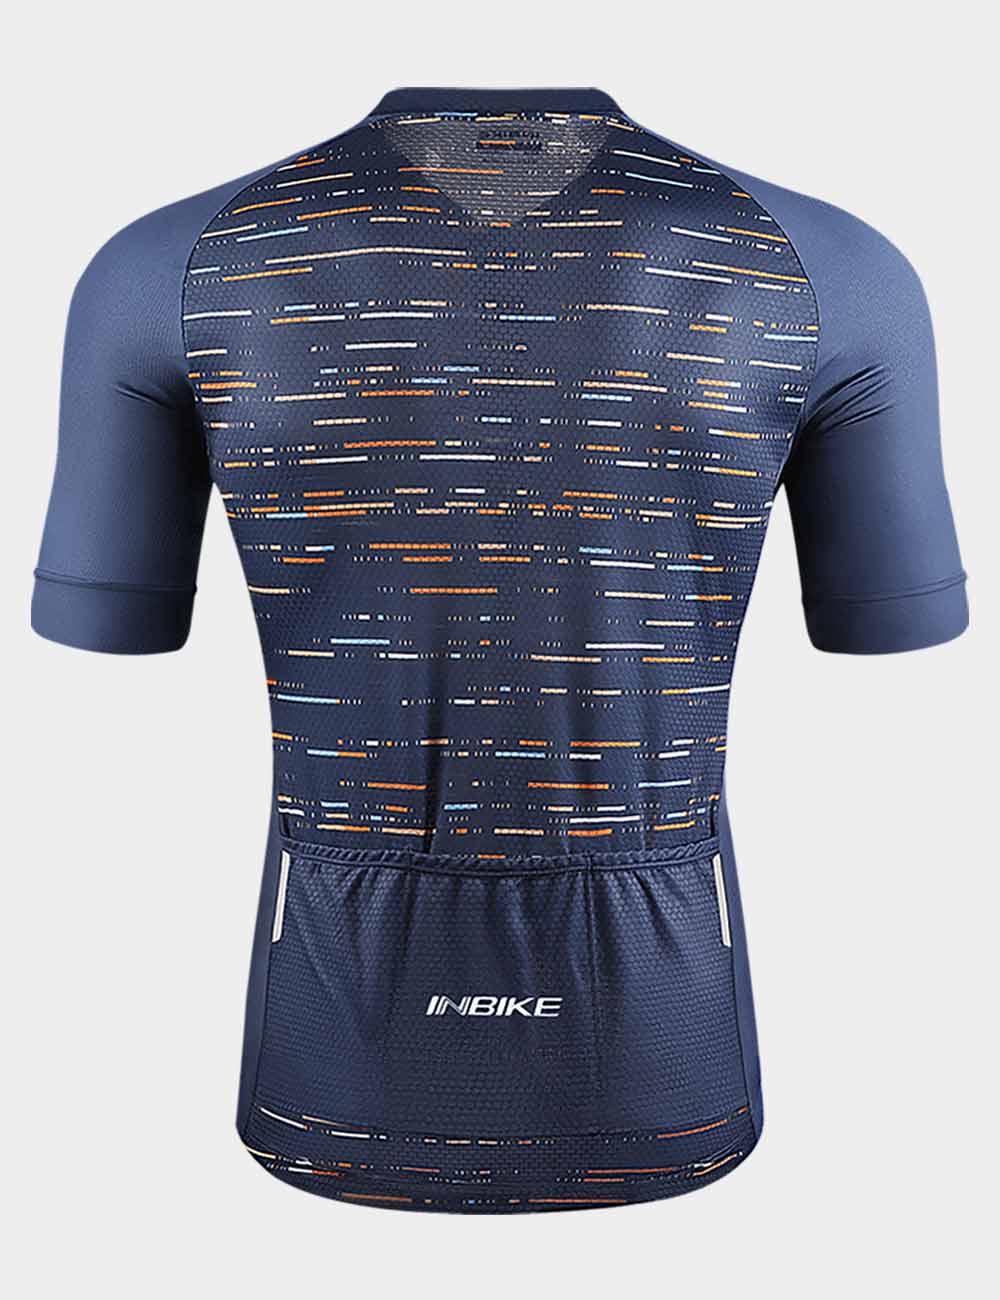 Details about   Men's Short Sleeves Cycling Jersey Quick Dry MTB Bike Shirt Clothing Tops Wear 